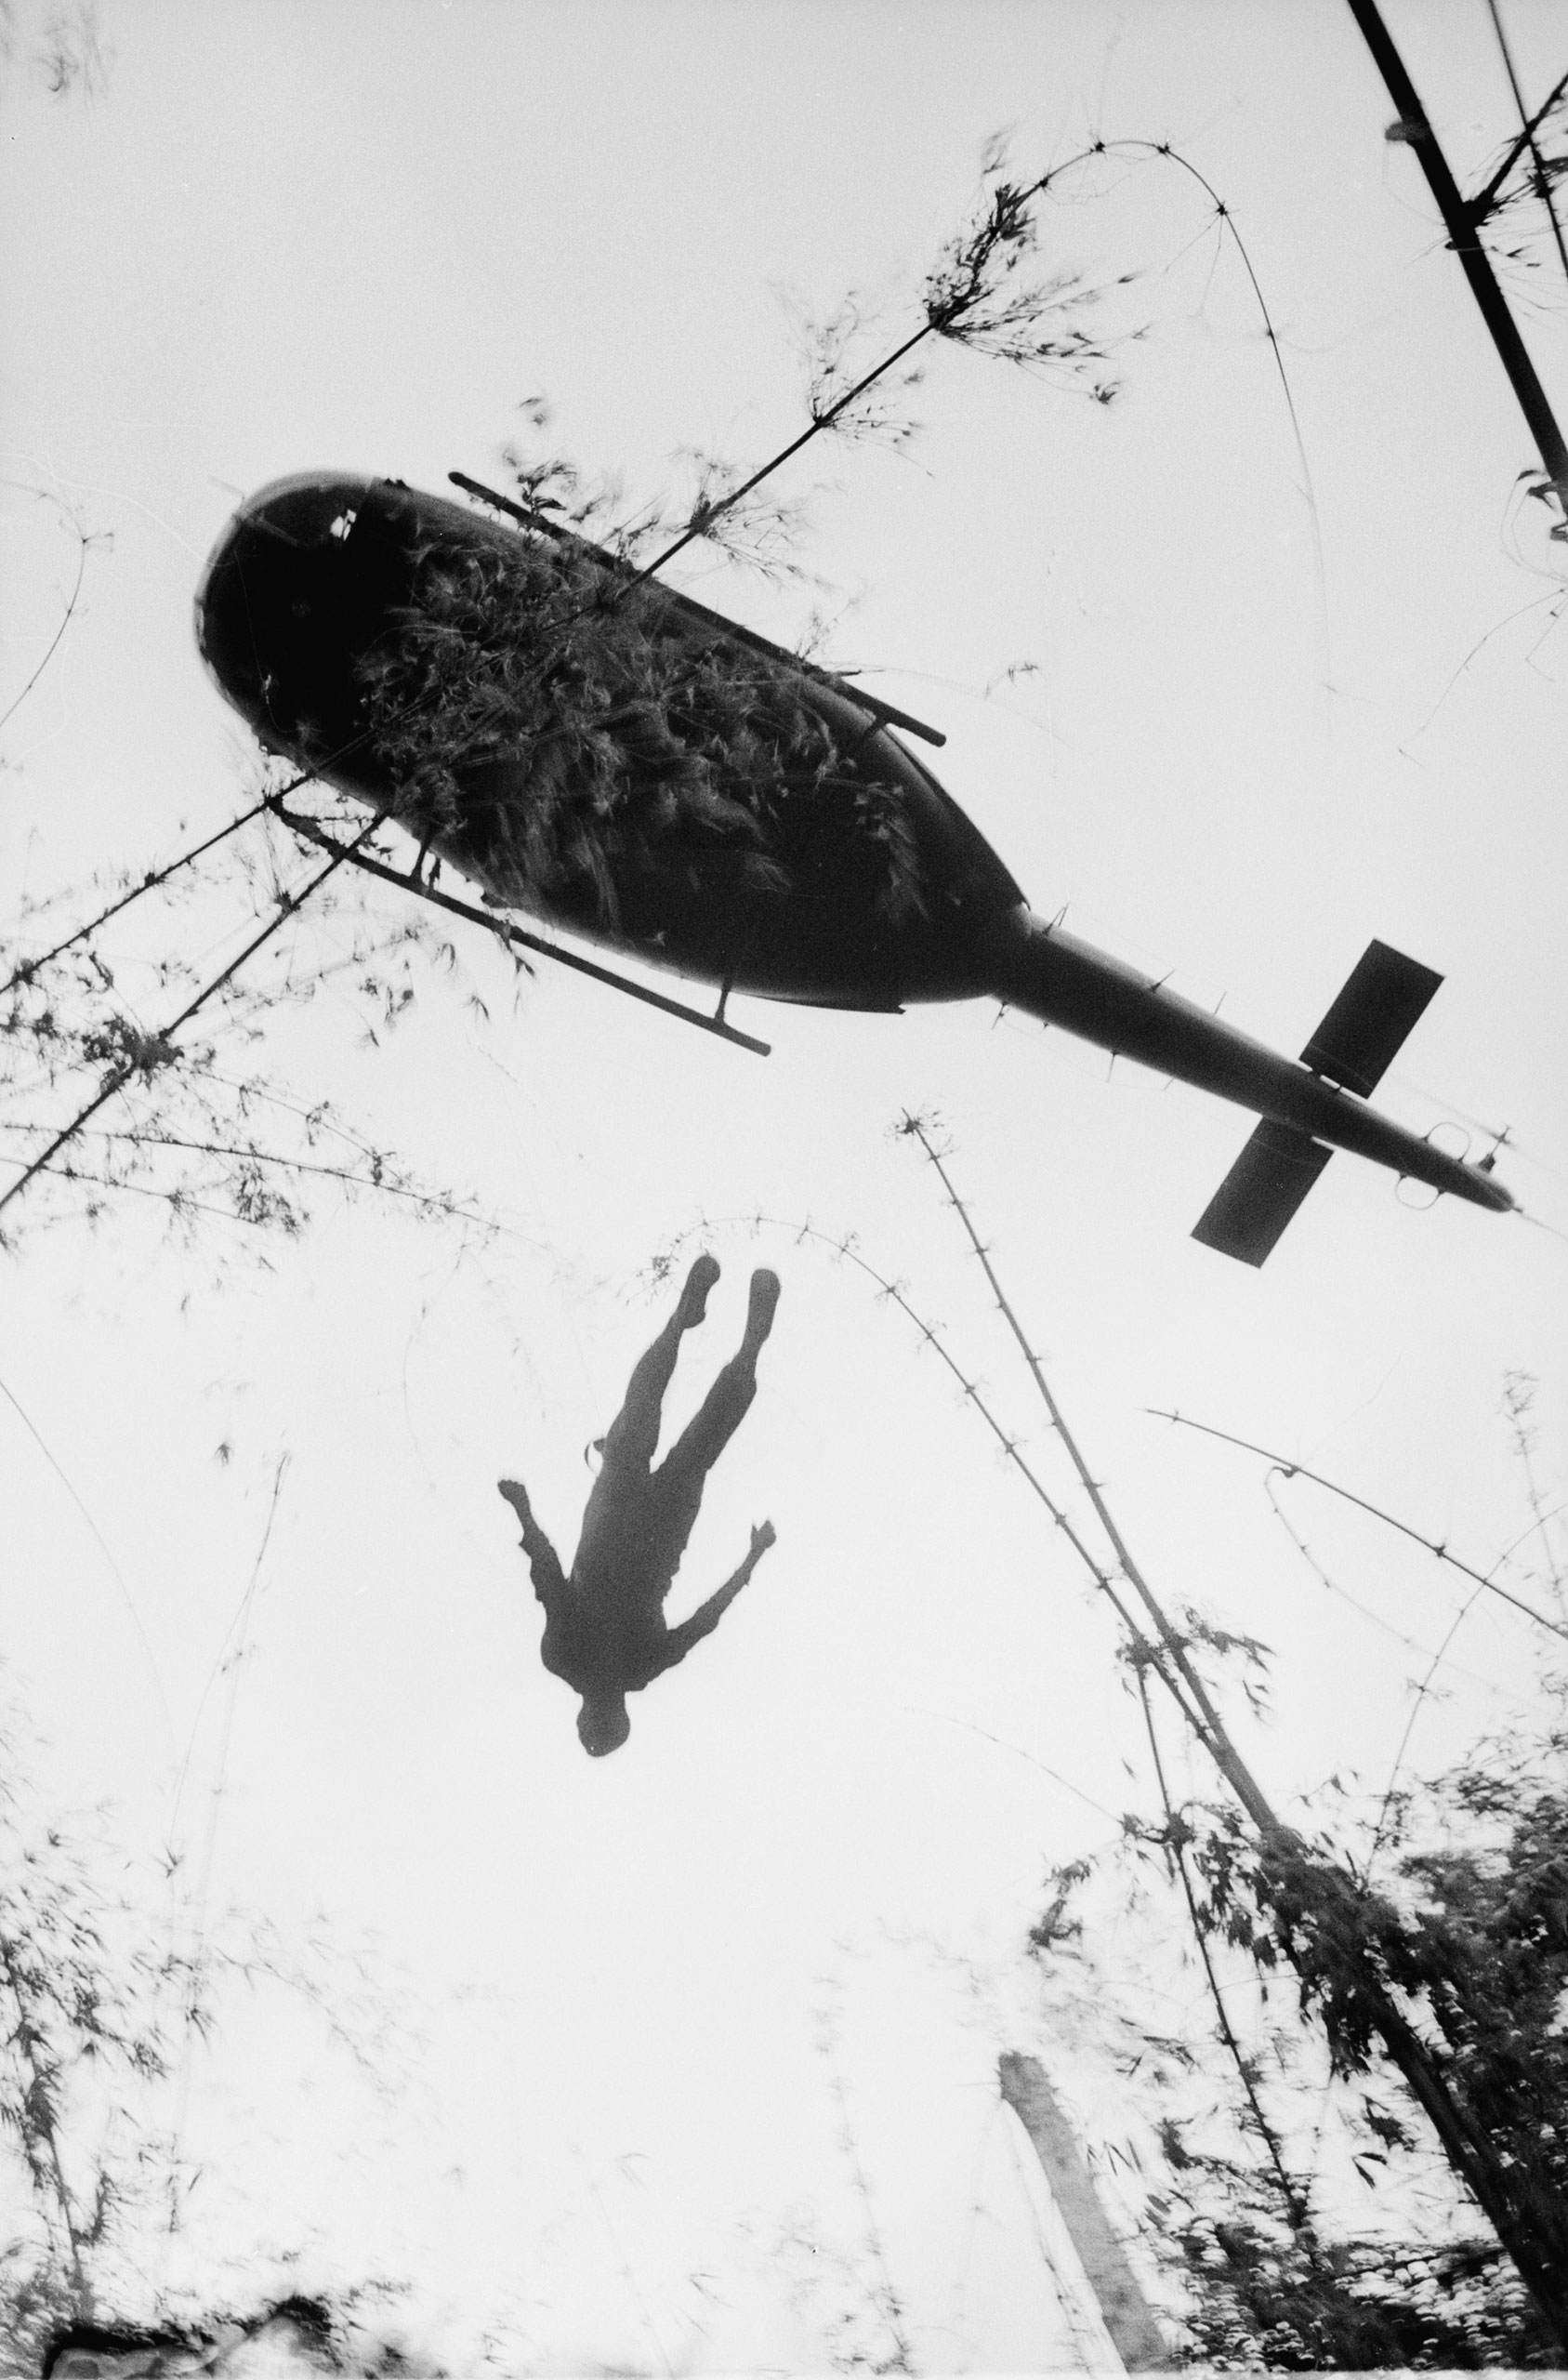 The body of an American paratrooper killed in action in the jungle near the Cambodian border is raised up to an evacuation helicopter in War Zone C in Vietnam on May 14, 1966.